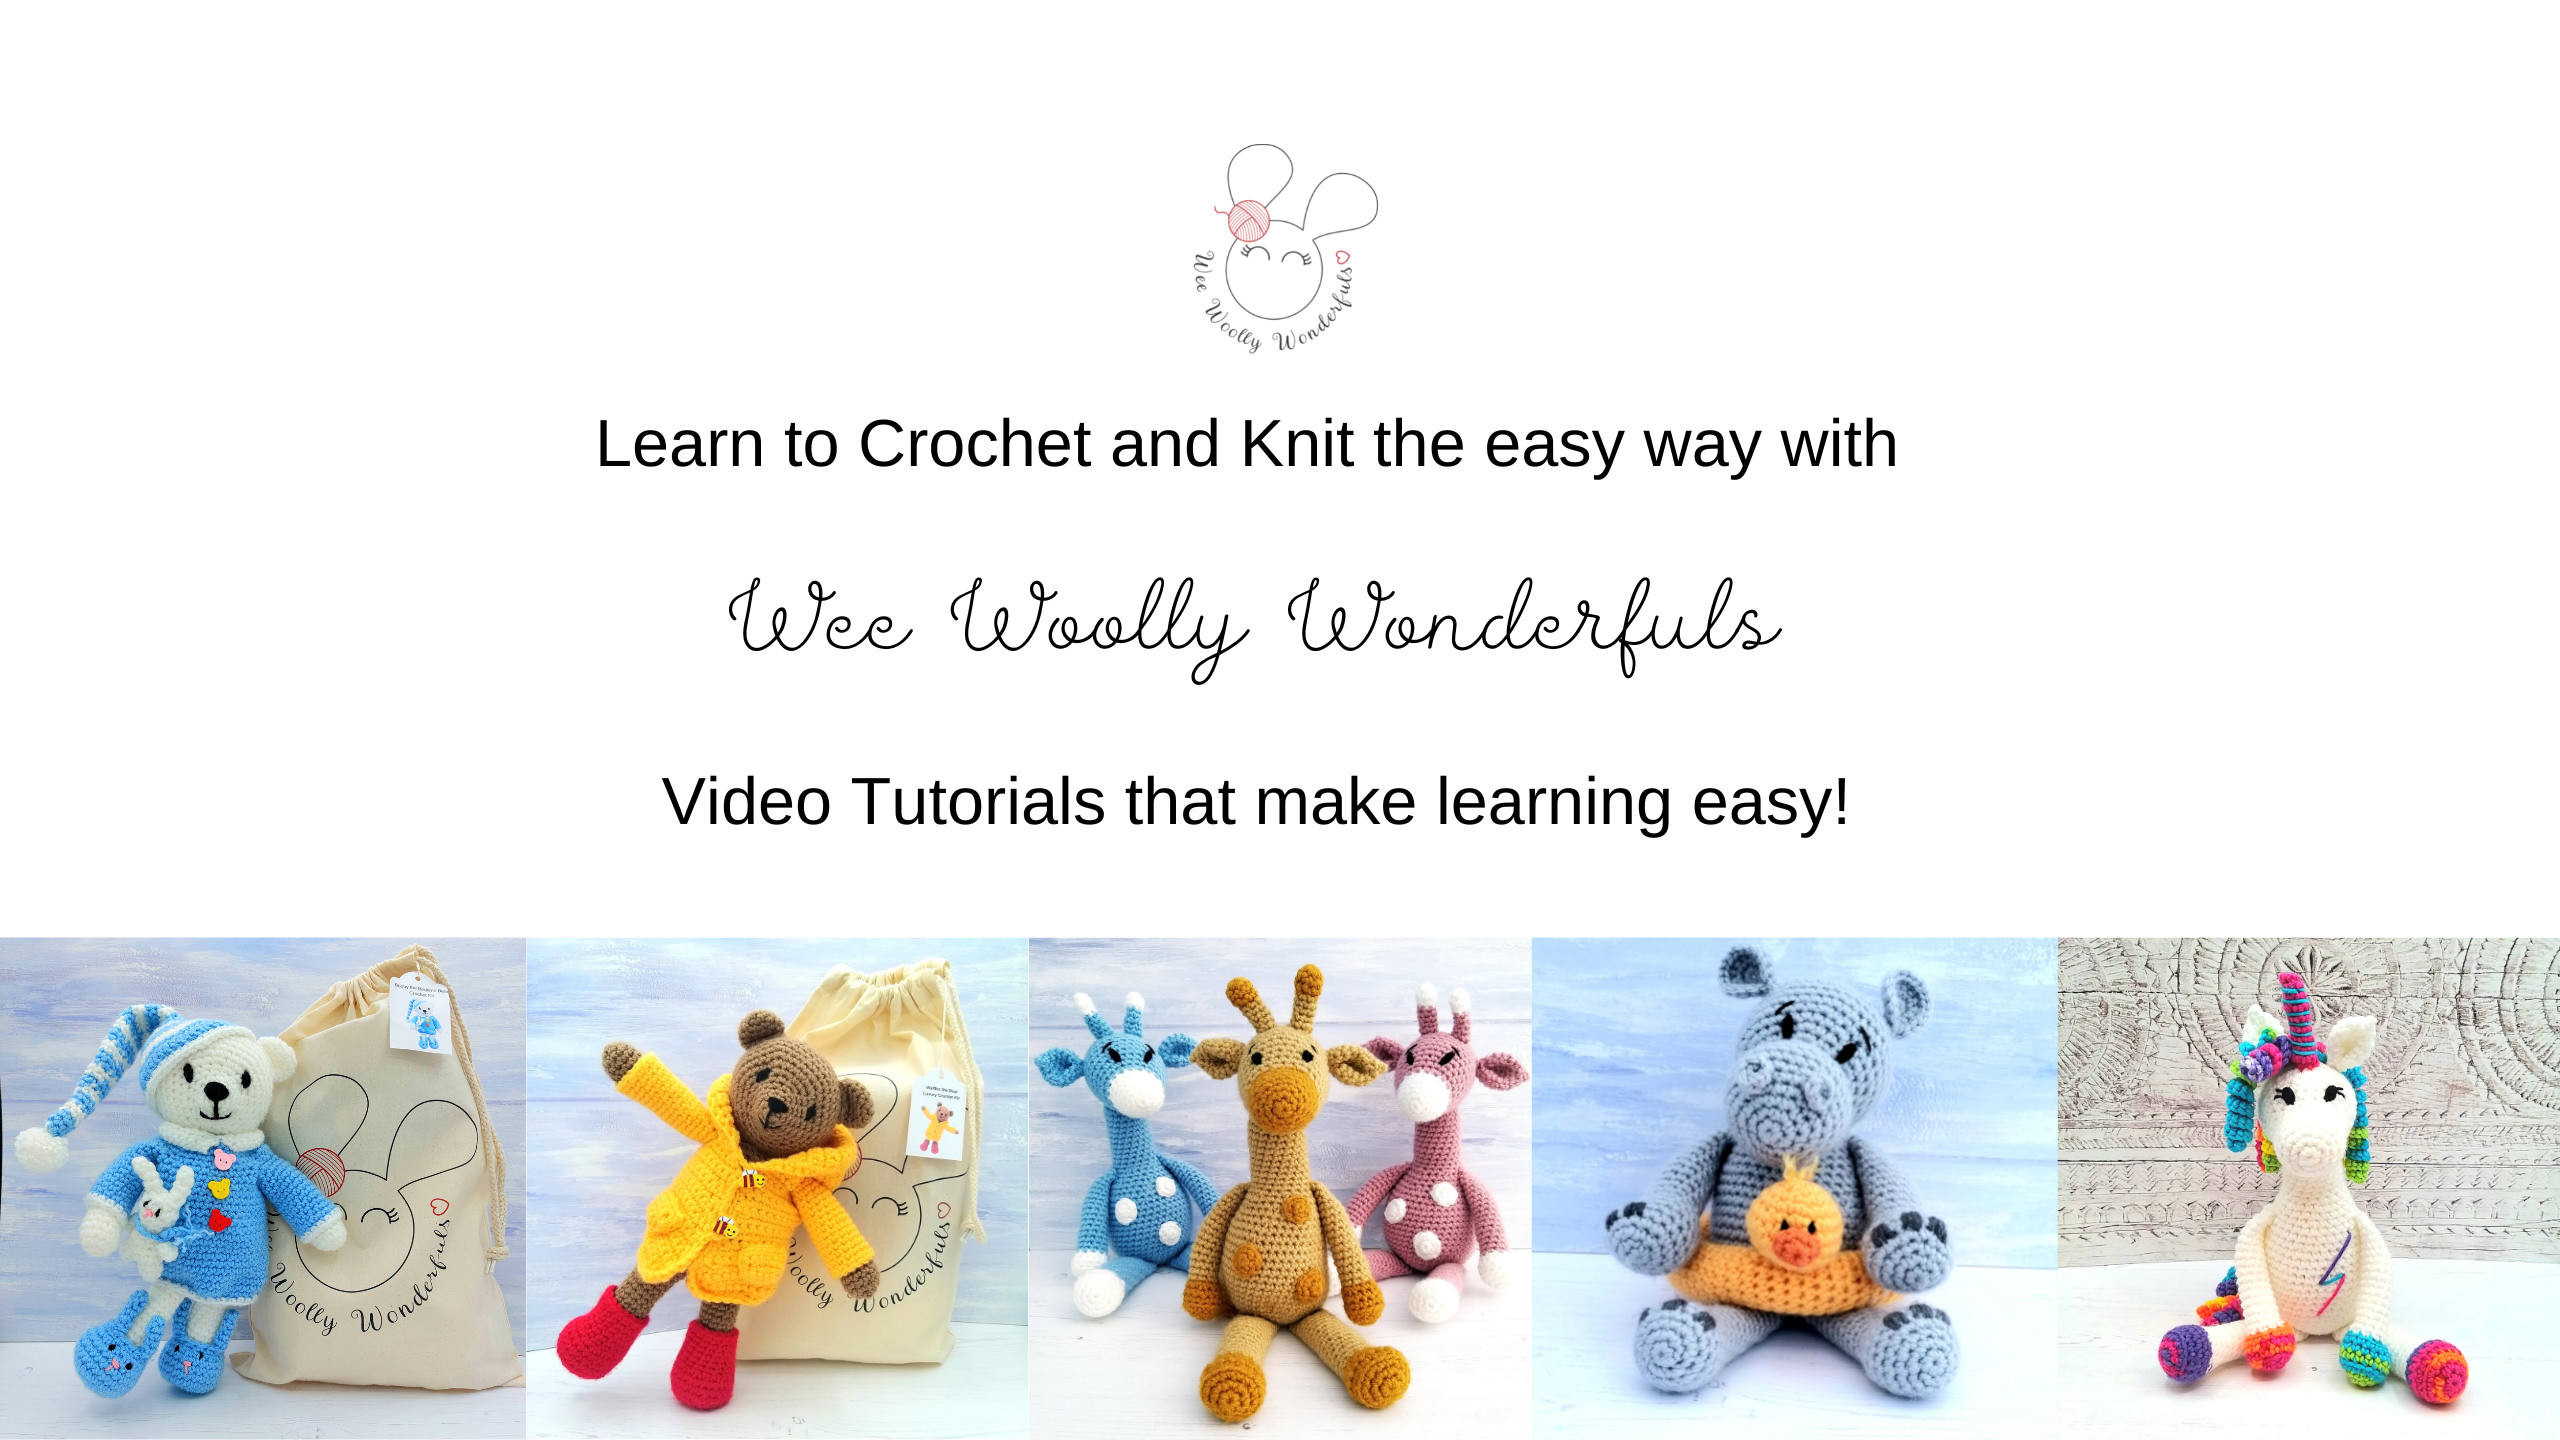 Load video: Lisa from Wee Woolly Wonderfuls video introduction to our crochet and knitting kits